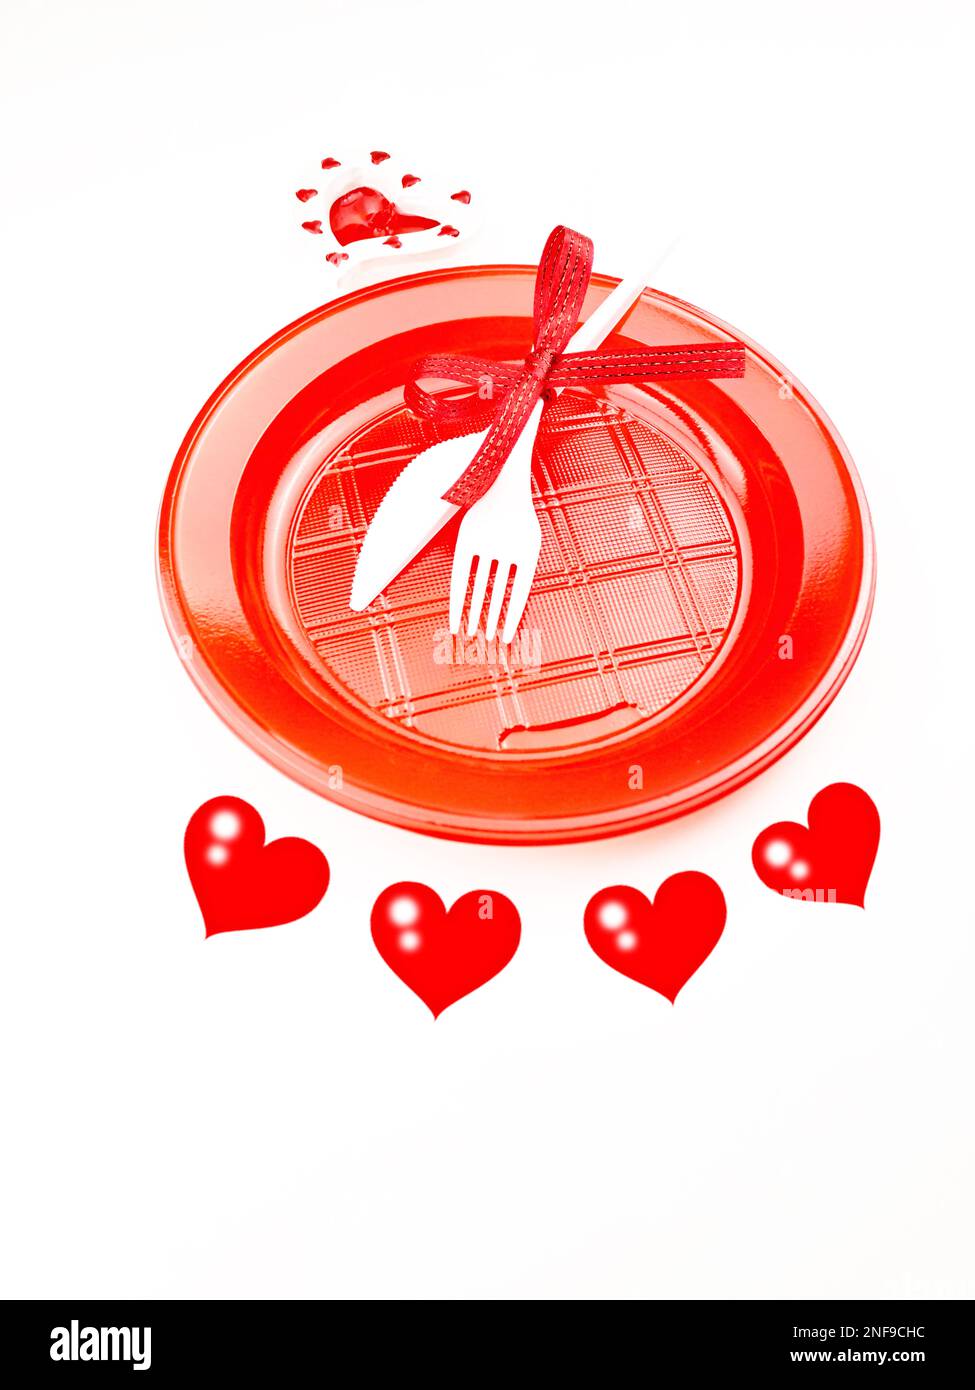 Holiday Menu For Valentine's Day. Plastic plate and cutlery. Outline hearts on a white background. Stock Photo